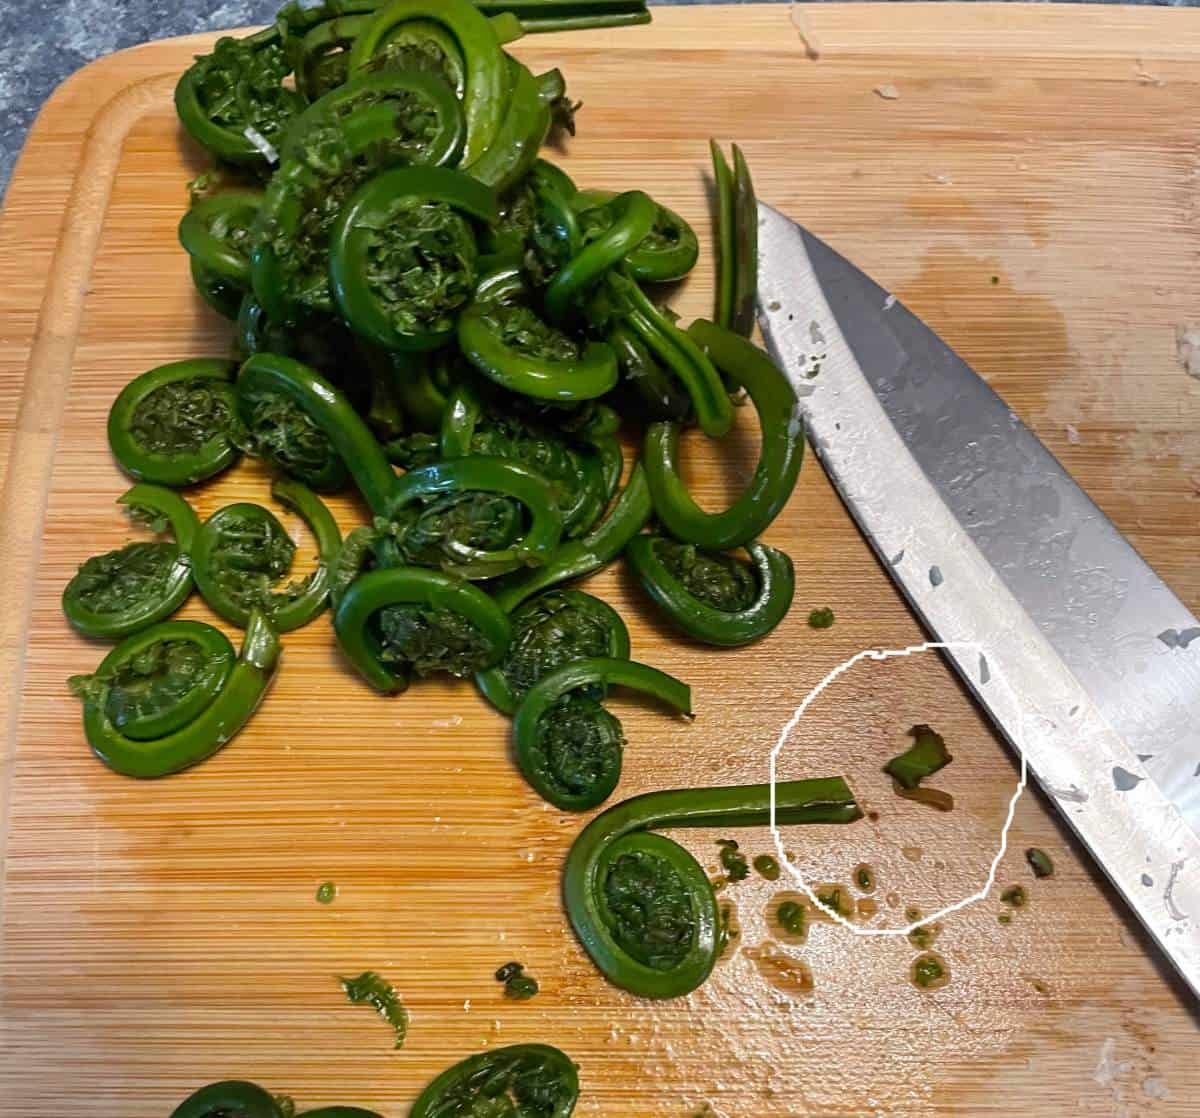 trimming the brown ends off fiddlehead ferns on a cutting board.